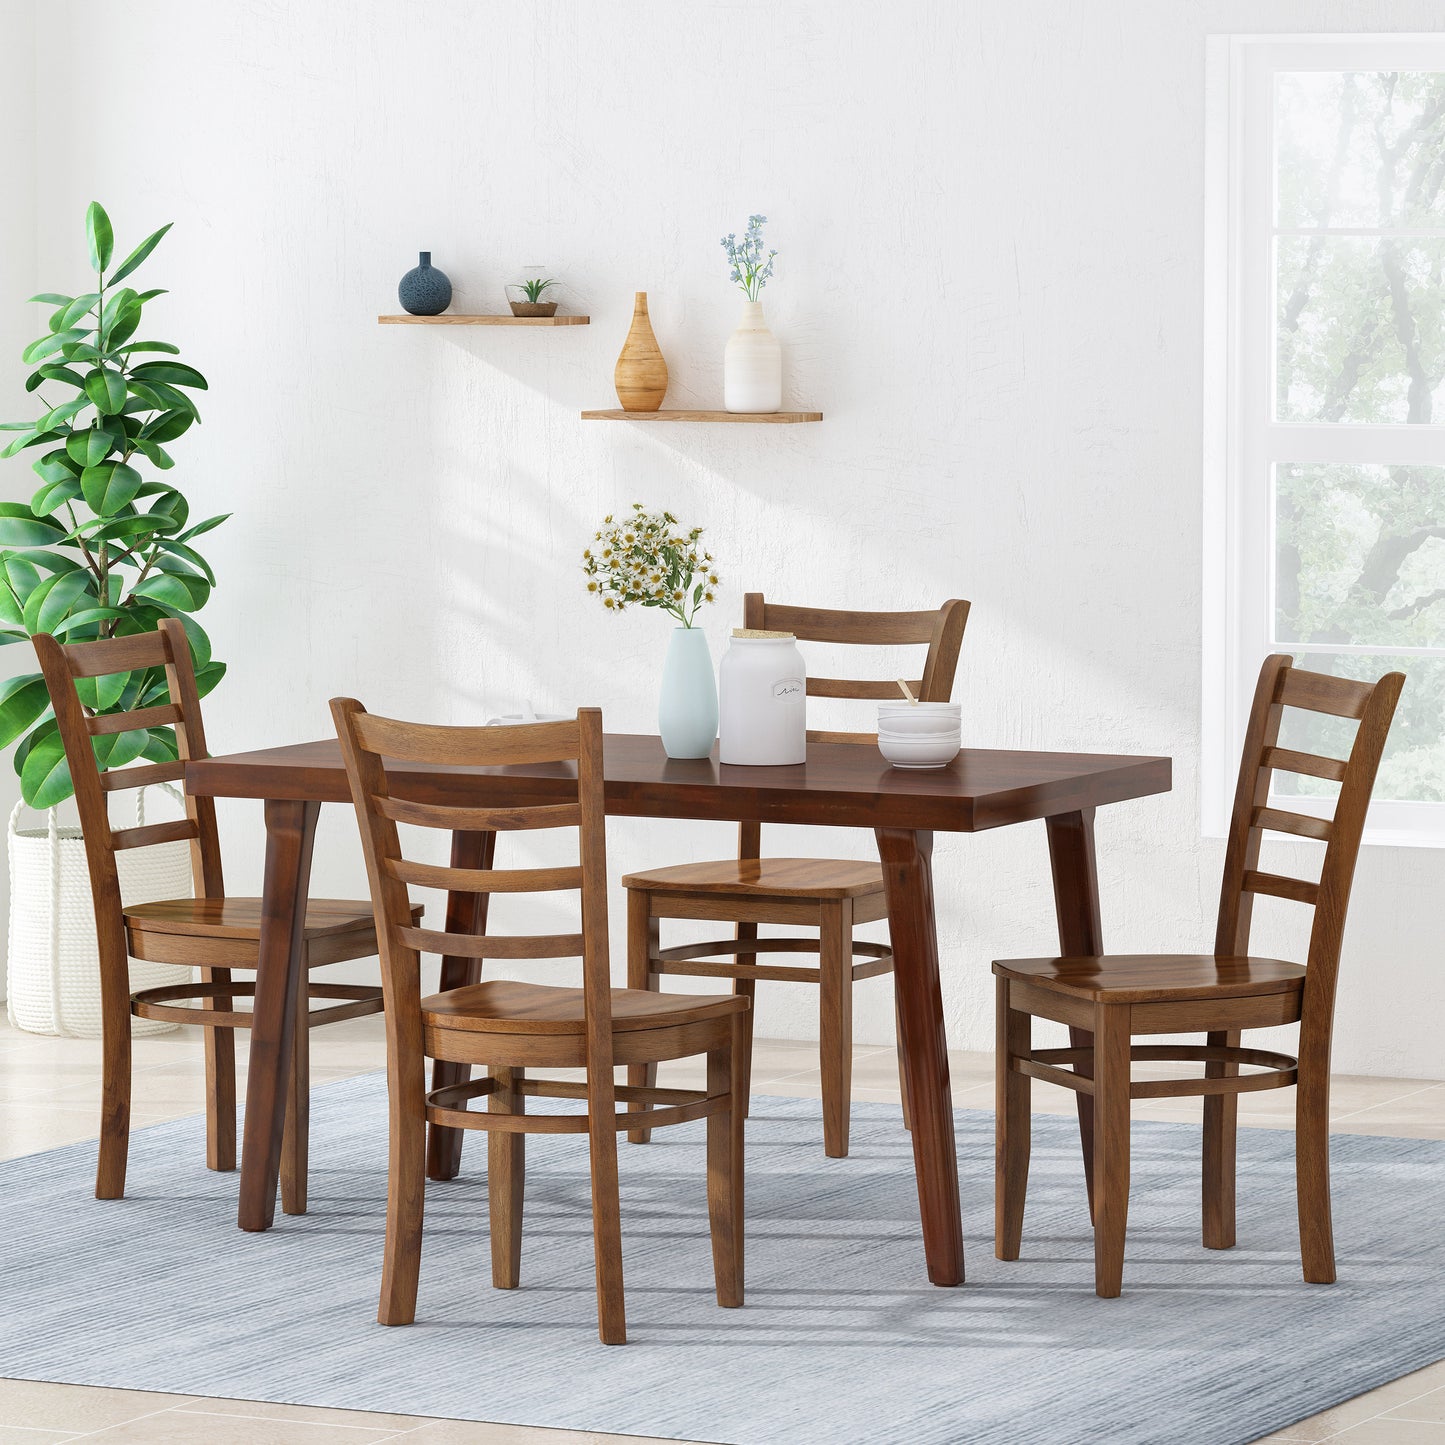 Wagner Farmhouse Wooden Dining Chairs (Set of 4)